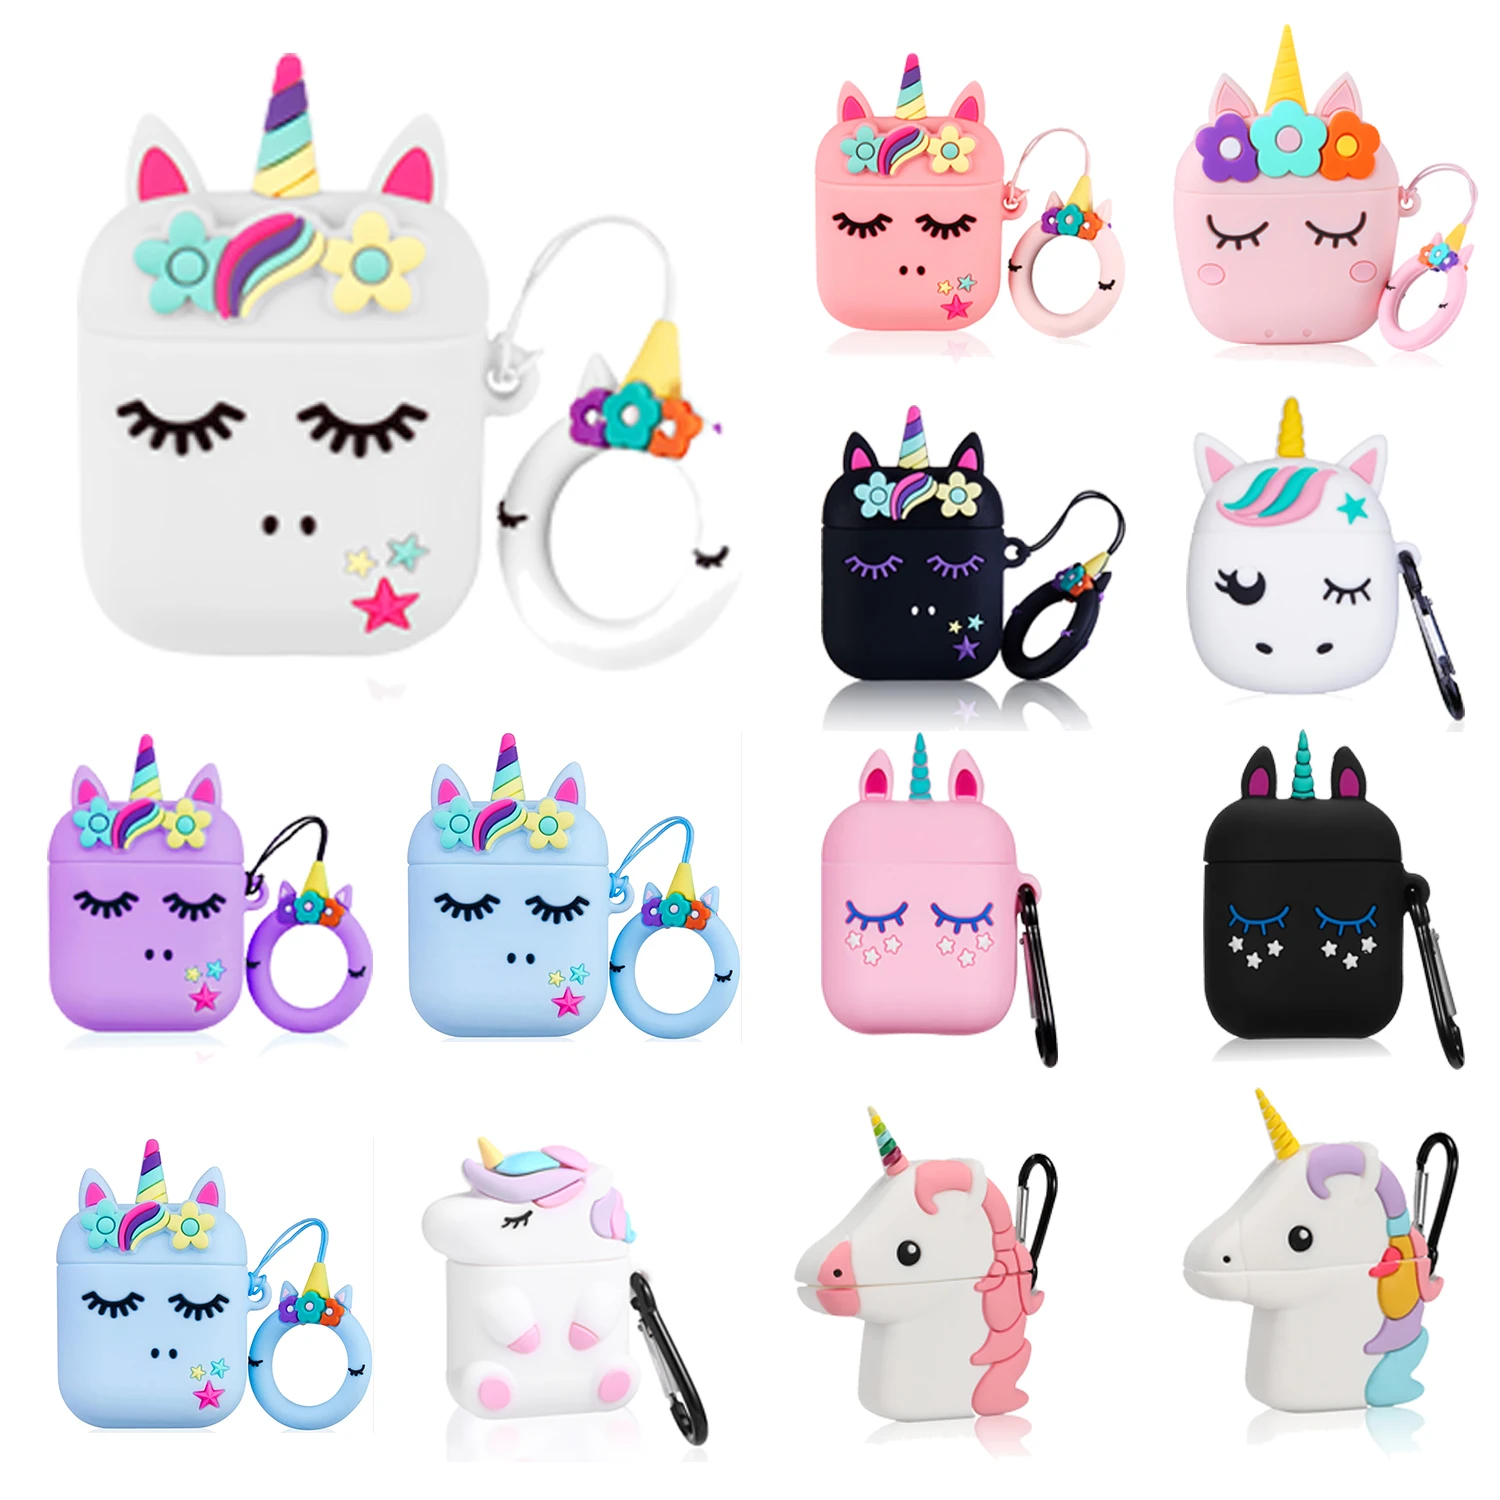 

New Arrived Earphone Protective Cute Cover For Airpod Cases 2021 Bulk Girly With Keychain, Multiple colors